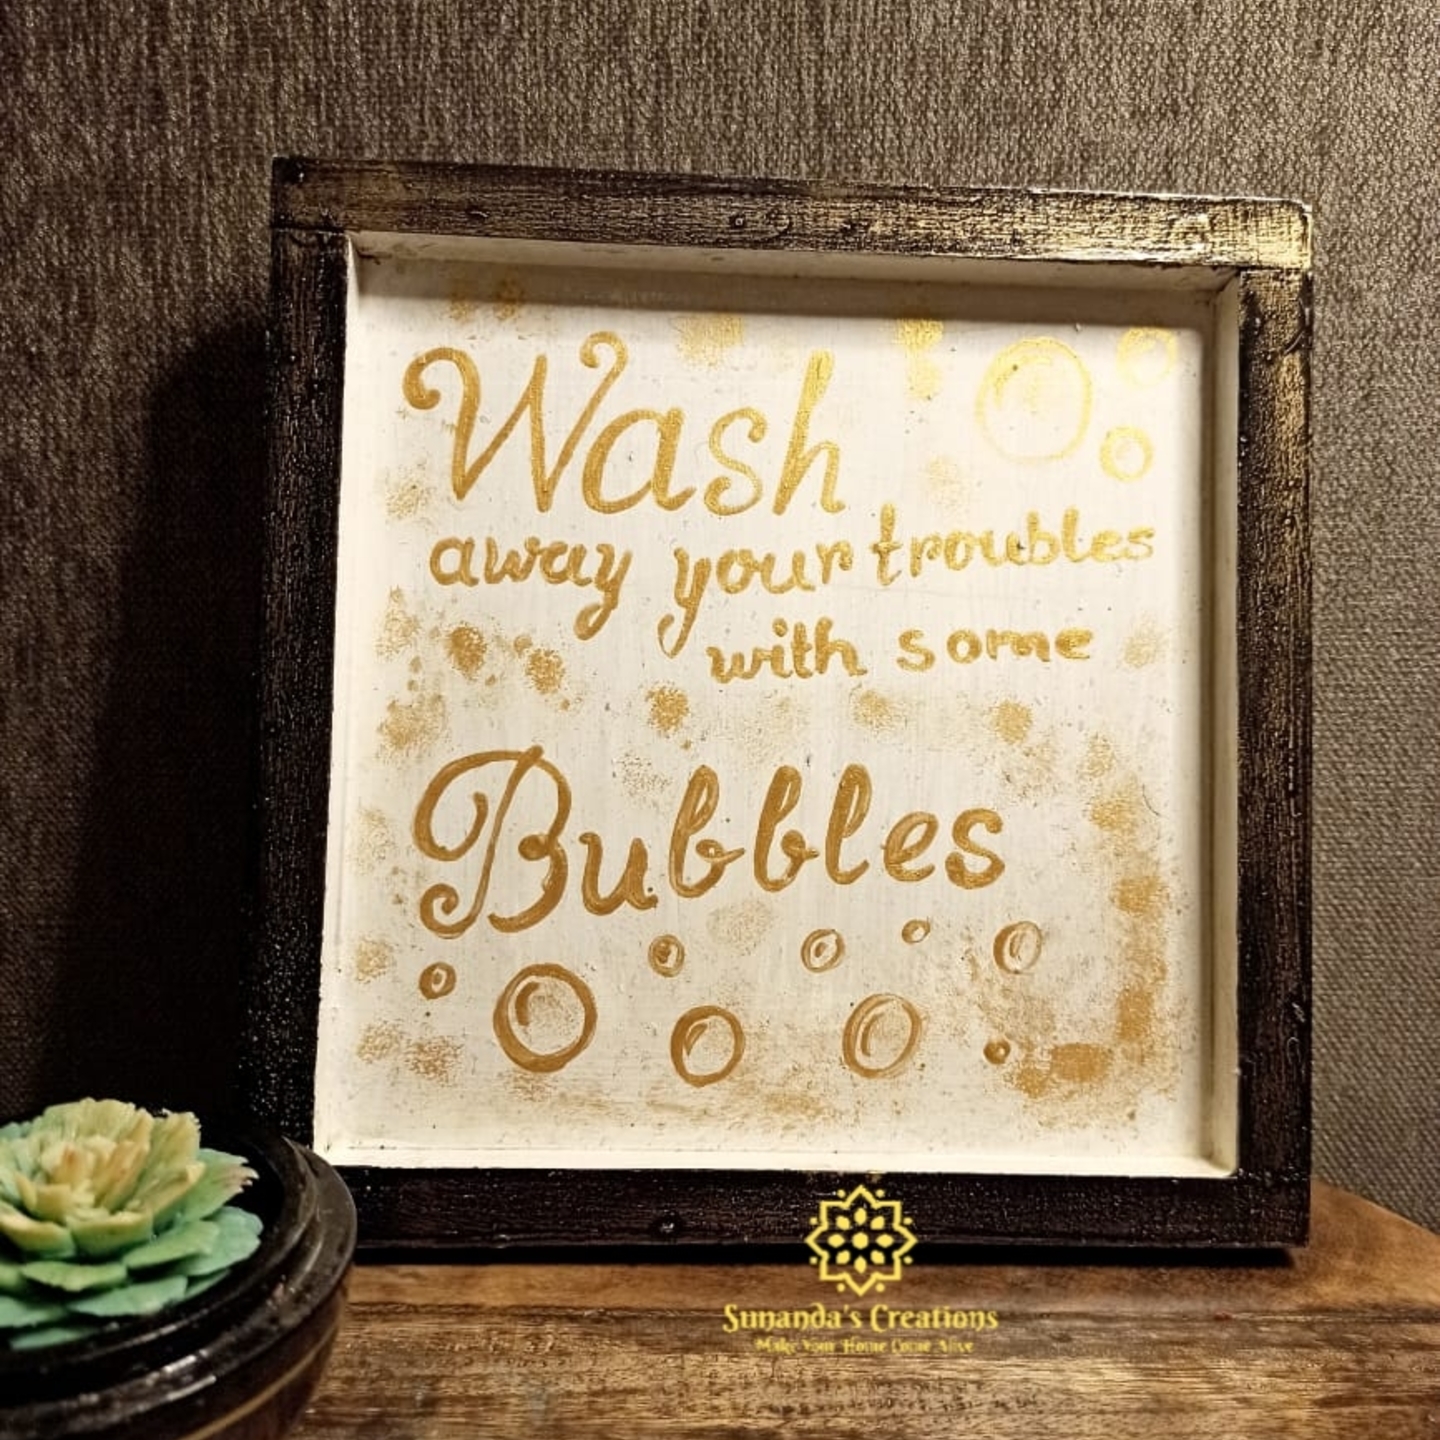 Wash away your troubles with sone BubblesHandpainted Wooden frame for Bathroom Decor